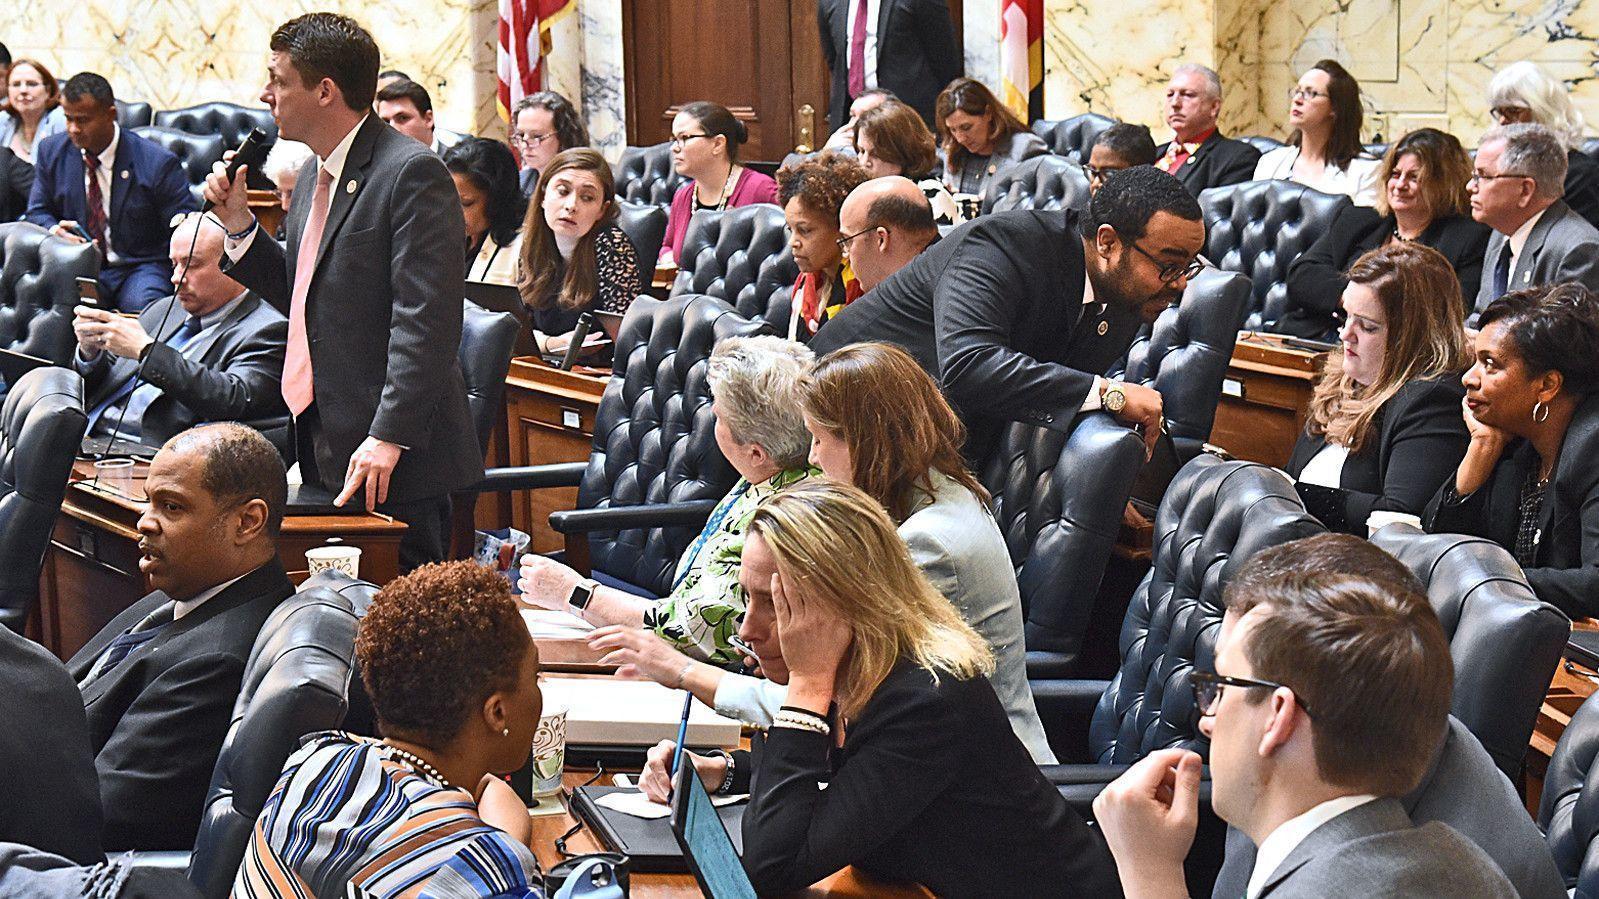 2019 Maryland General Assembly: Here's what happened with the key issues